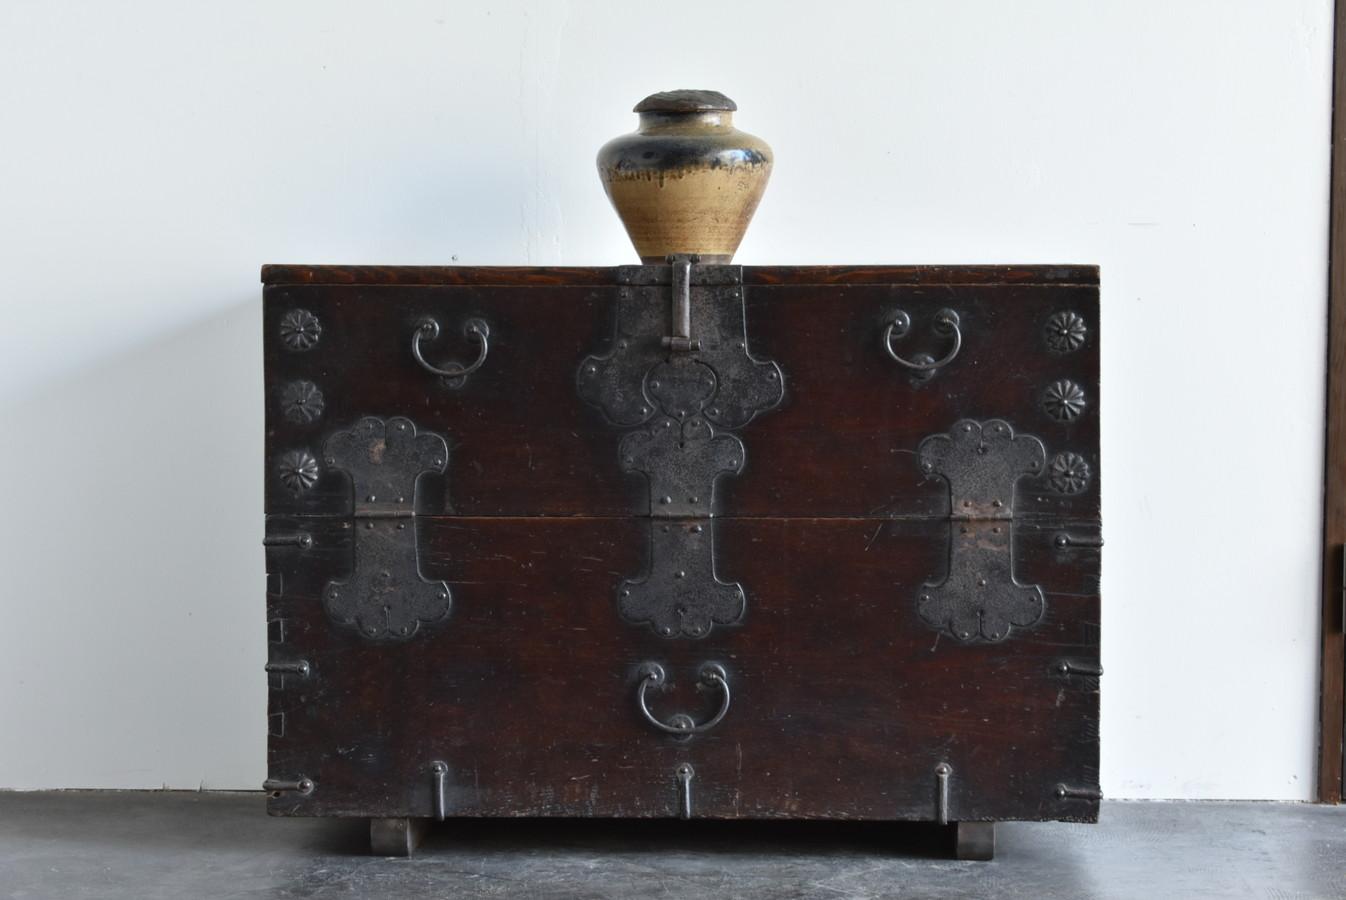 Korean furniture from the Joseon era.
It is thought to be from the 19th century.
The metal fittings are made of iron, the front part is made of chestnut, and the others are made of pine.
The door has a unique structure that opens halfway.
A